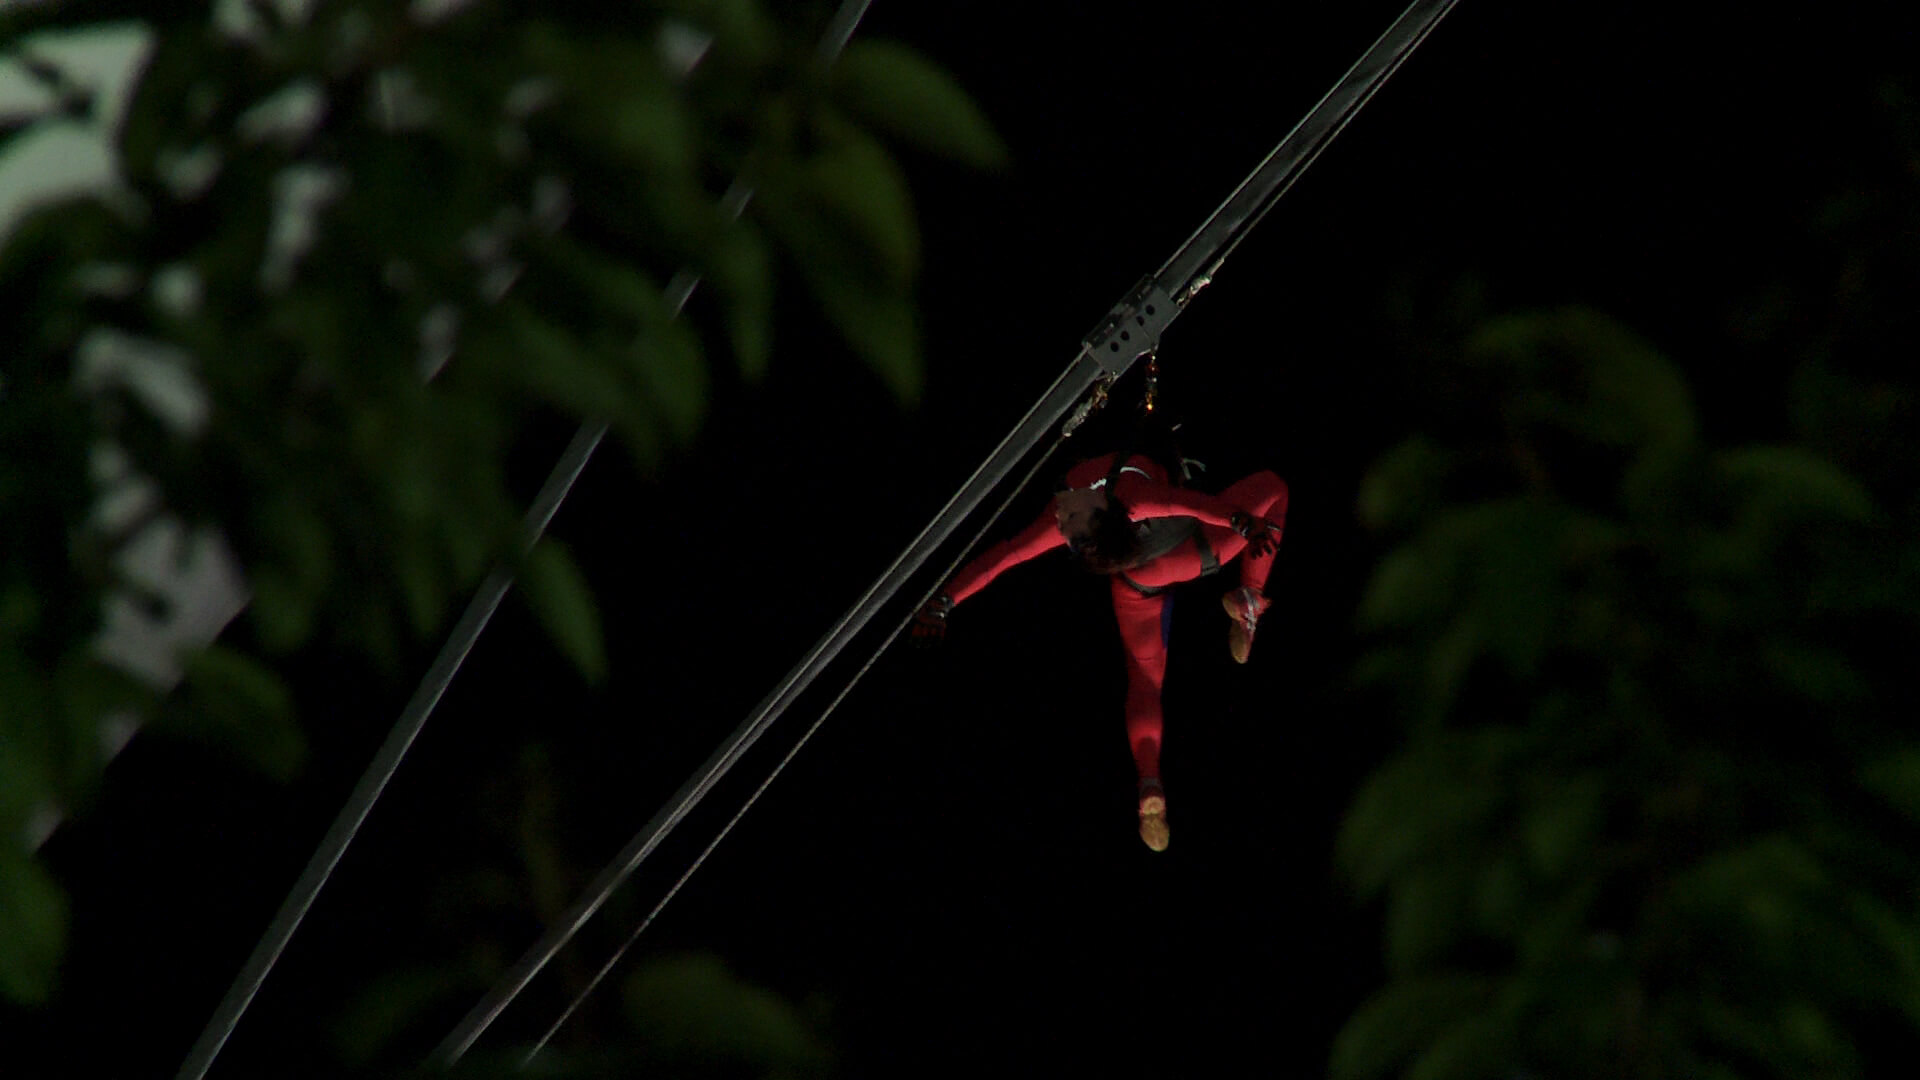 In the night, a human figure wearing a red body suit is hanging from a cable.